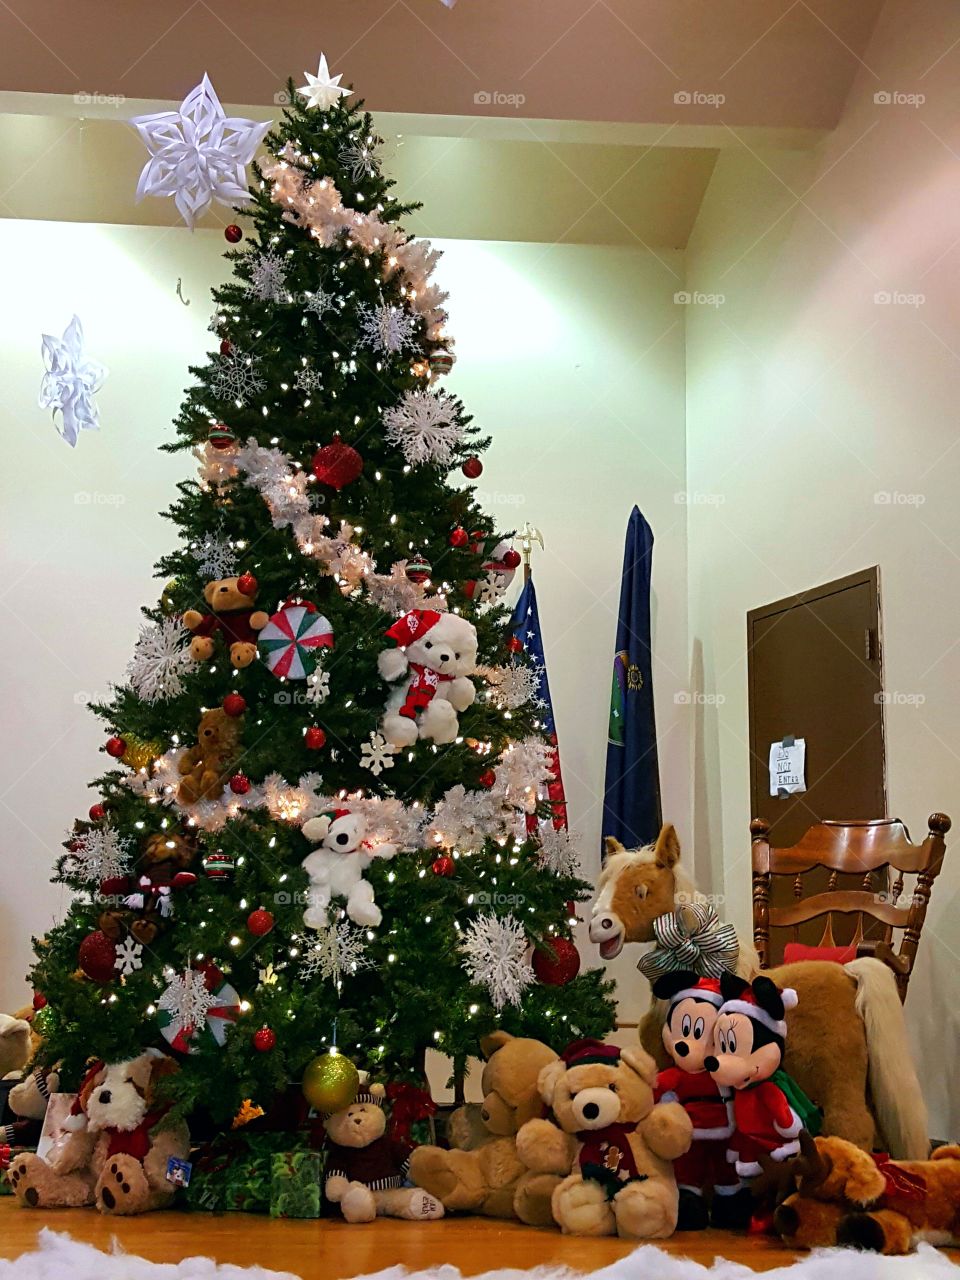 Celebrating Christmas in a rural community is more about the people & less about the glitz. Even so, nothing says Happy Holidays like a Christmas tree decorated in cute Teddy Bears!